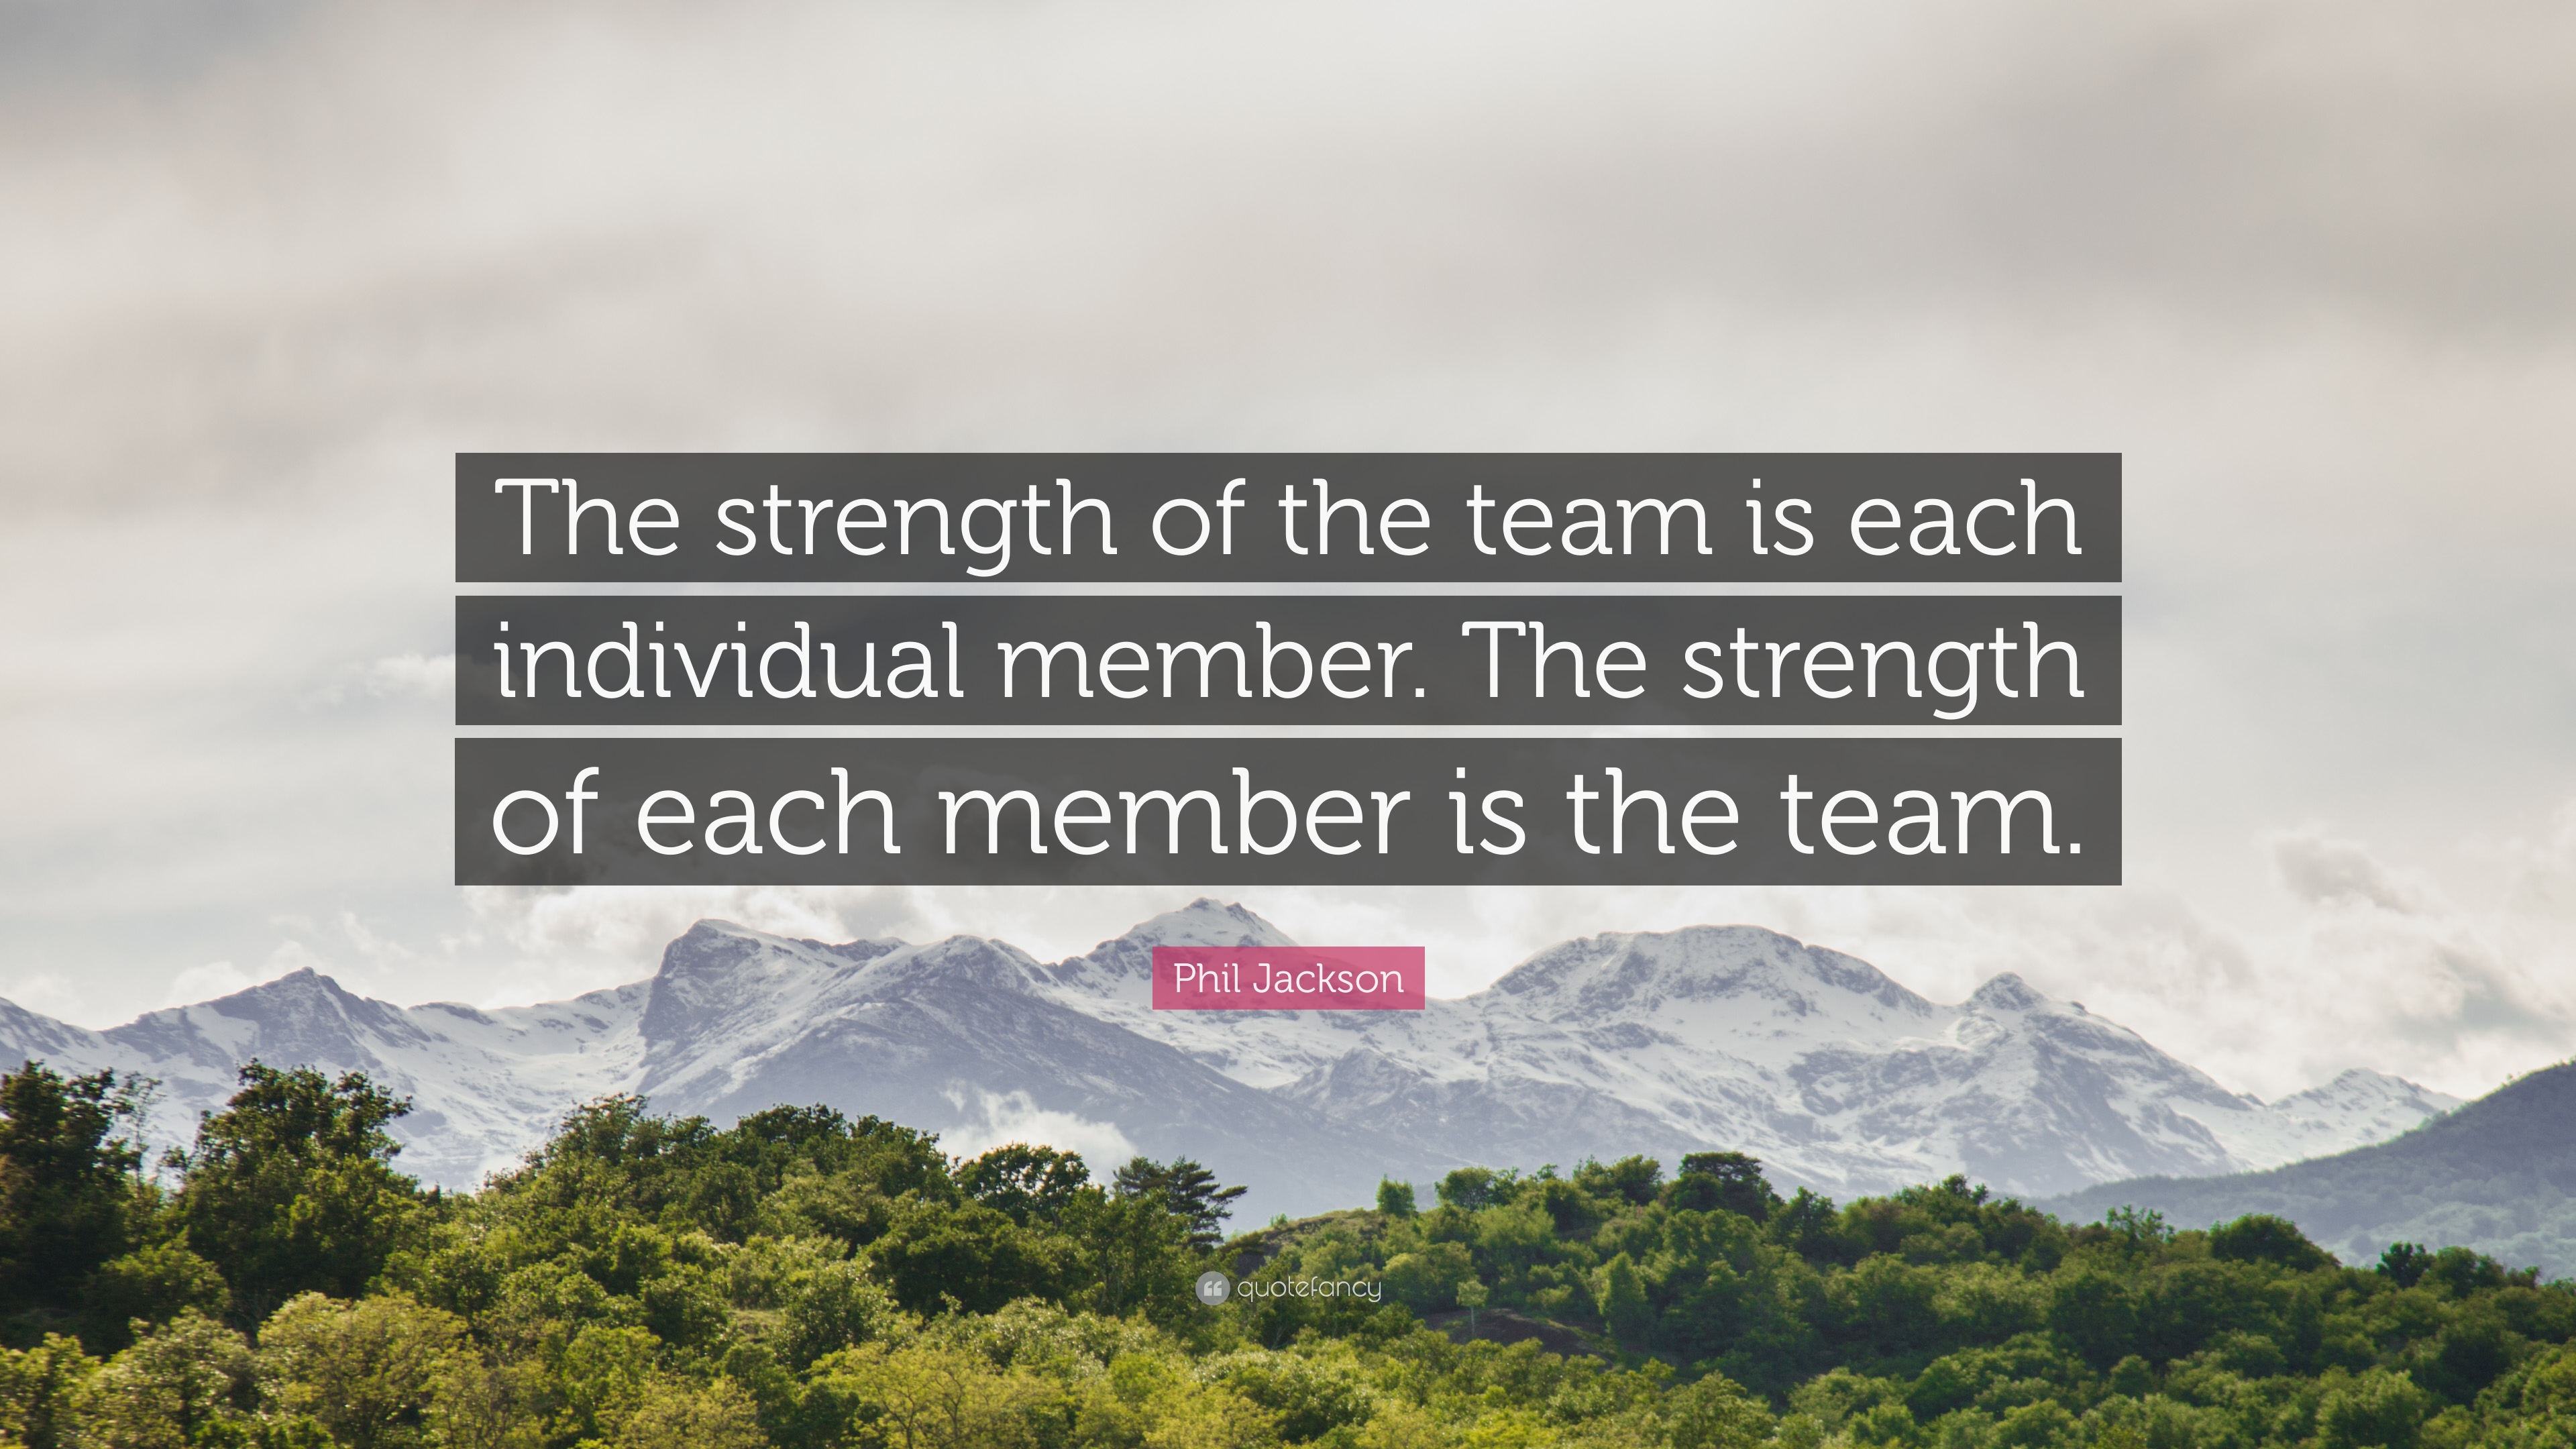 Phil Jackson Quote: “The strength of the team is each individual member. The strength of each